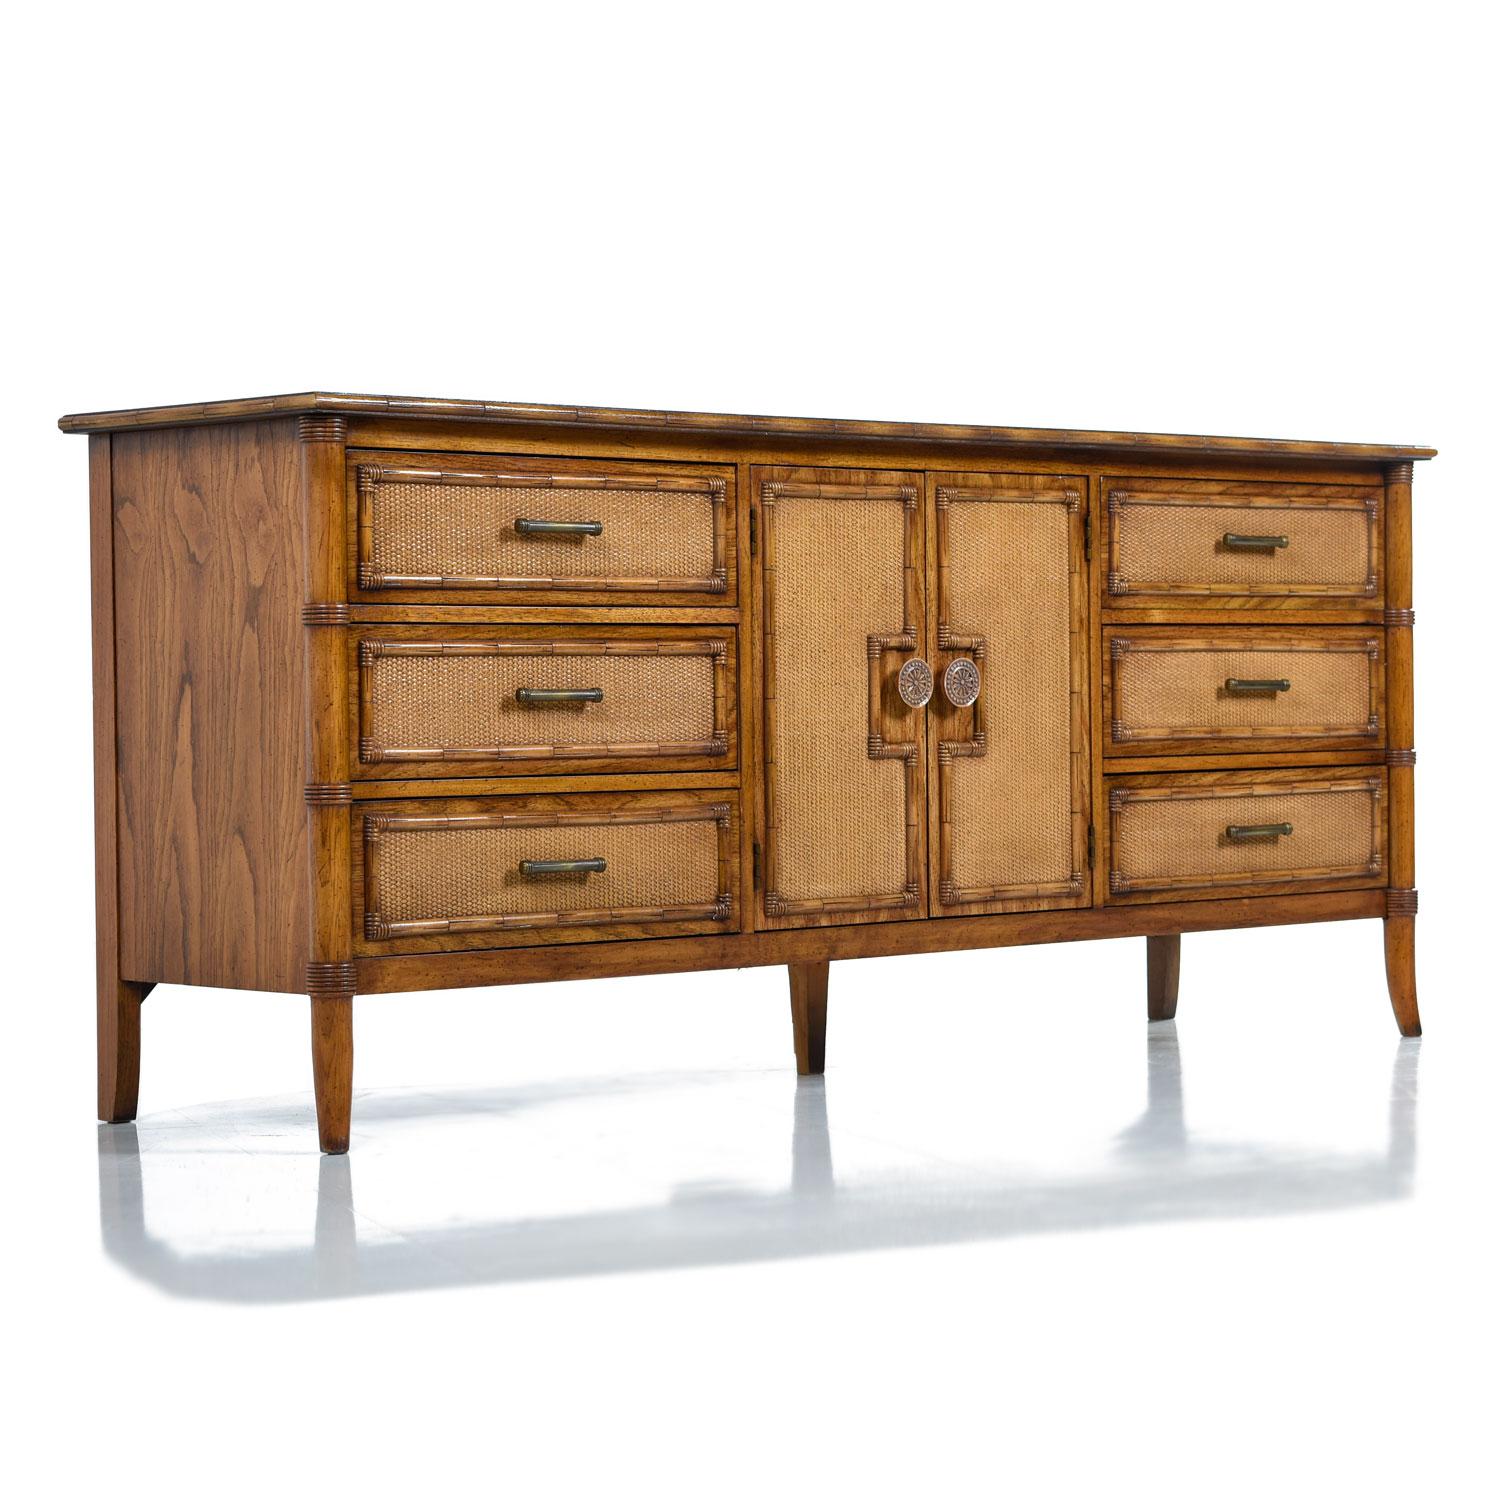 Breathtaking Mediterranean style Hollywood Regency dresser / credenza. Made by Thomasville Furniture Company, circa 1970s. Lots of flare packed into the this restored vintage Eastern inspired dresser. The richly grained golden fly-spec oak wood is